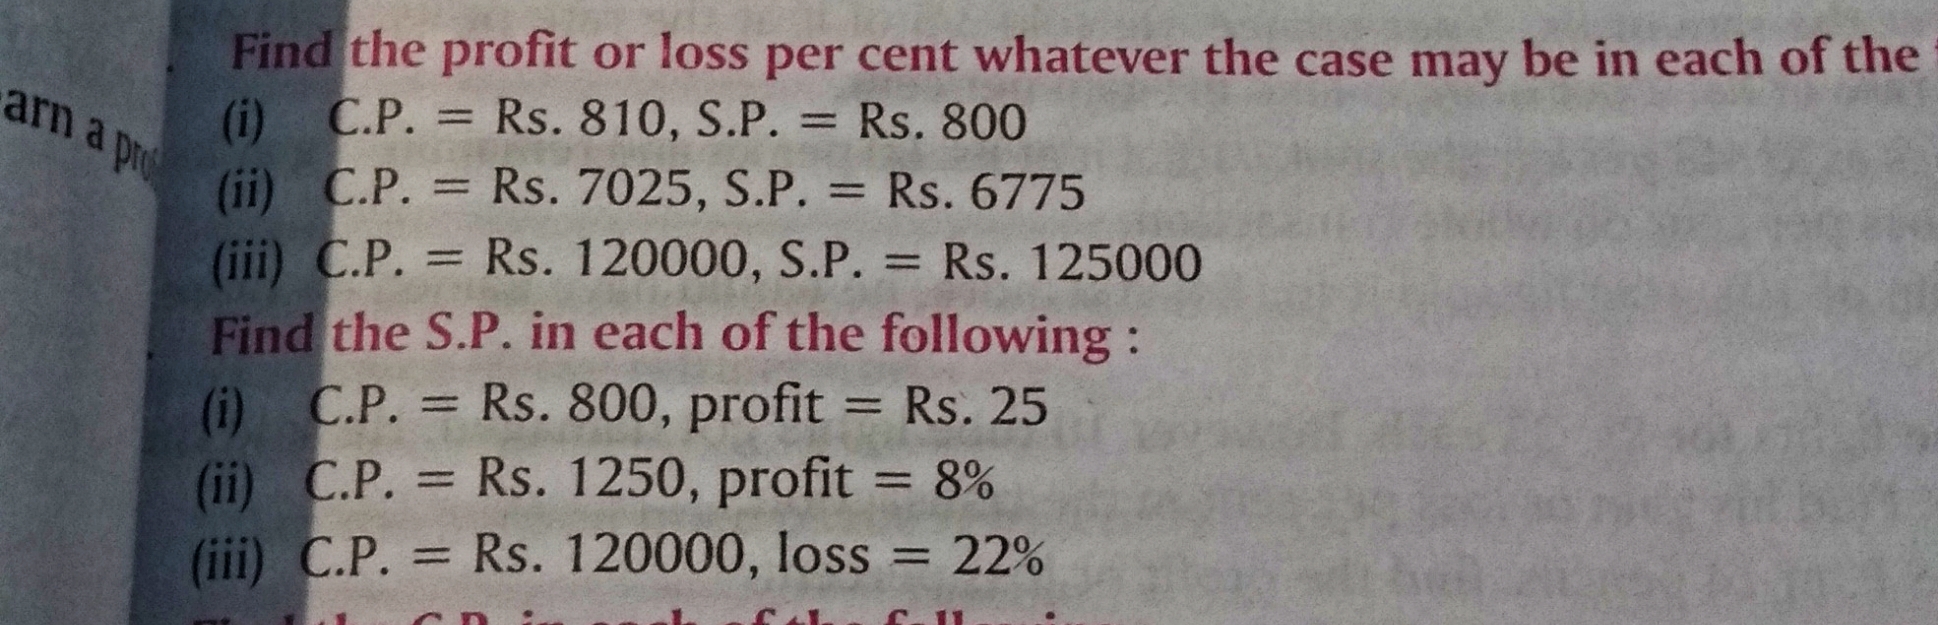 Find the profit or loss per cent whatever the case may be in each of t